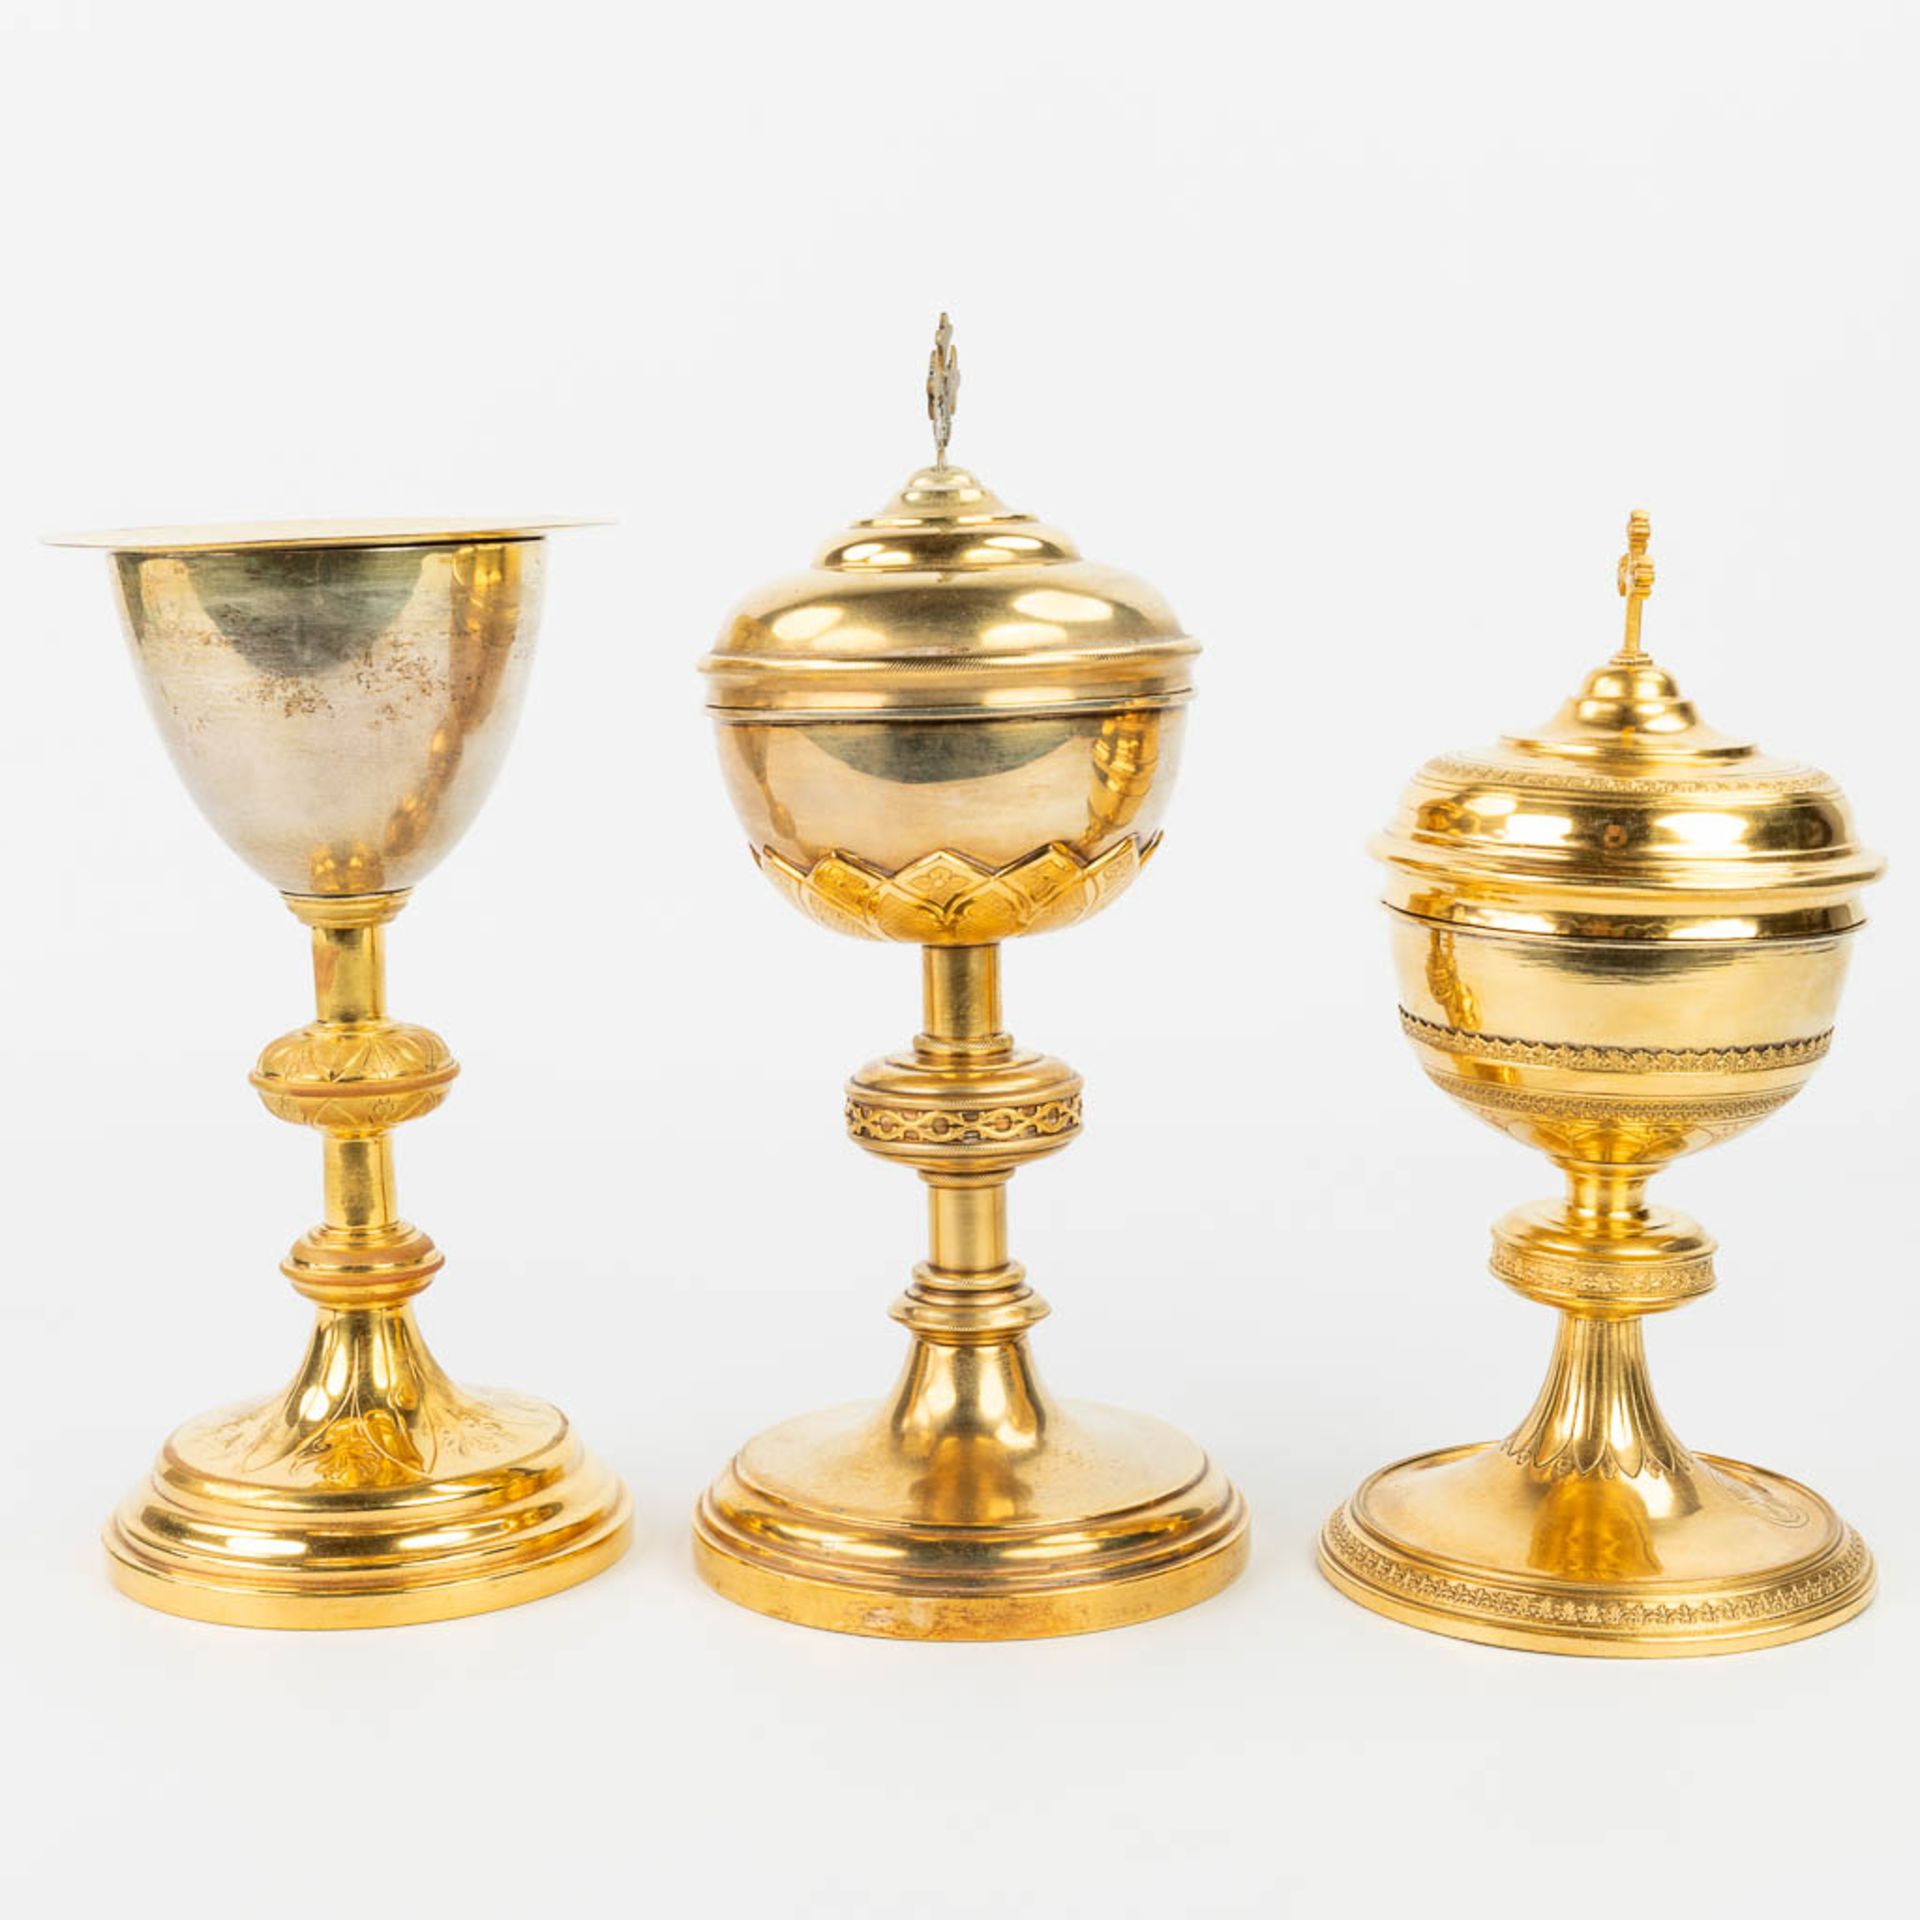 A collection of 4 large ciboria and a chalice made of silver and gold plated metal. - Image 3 of 24